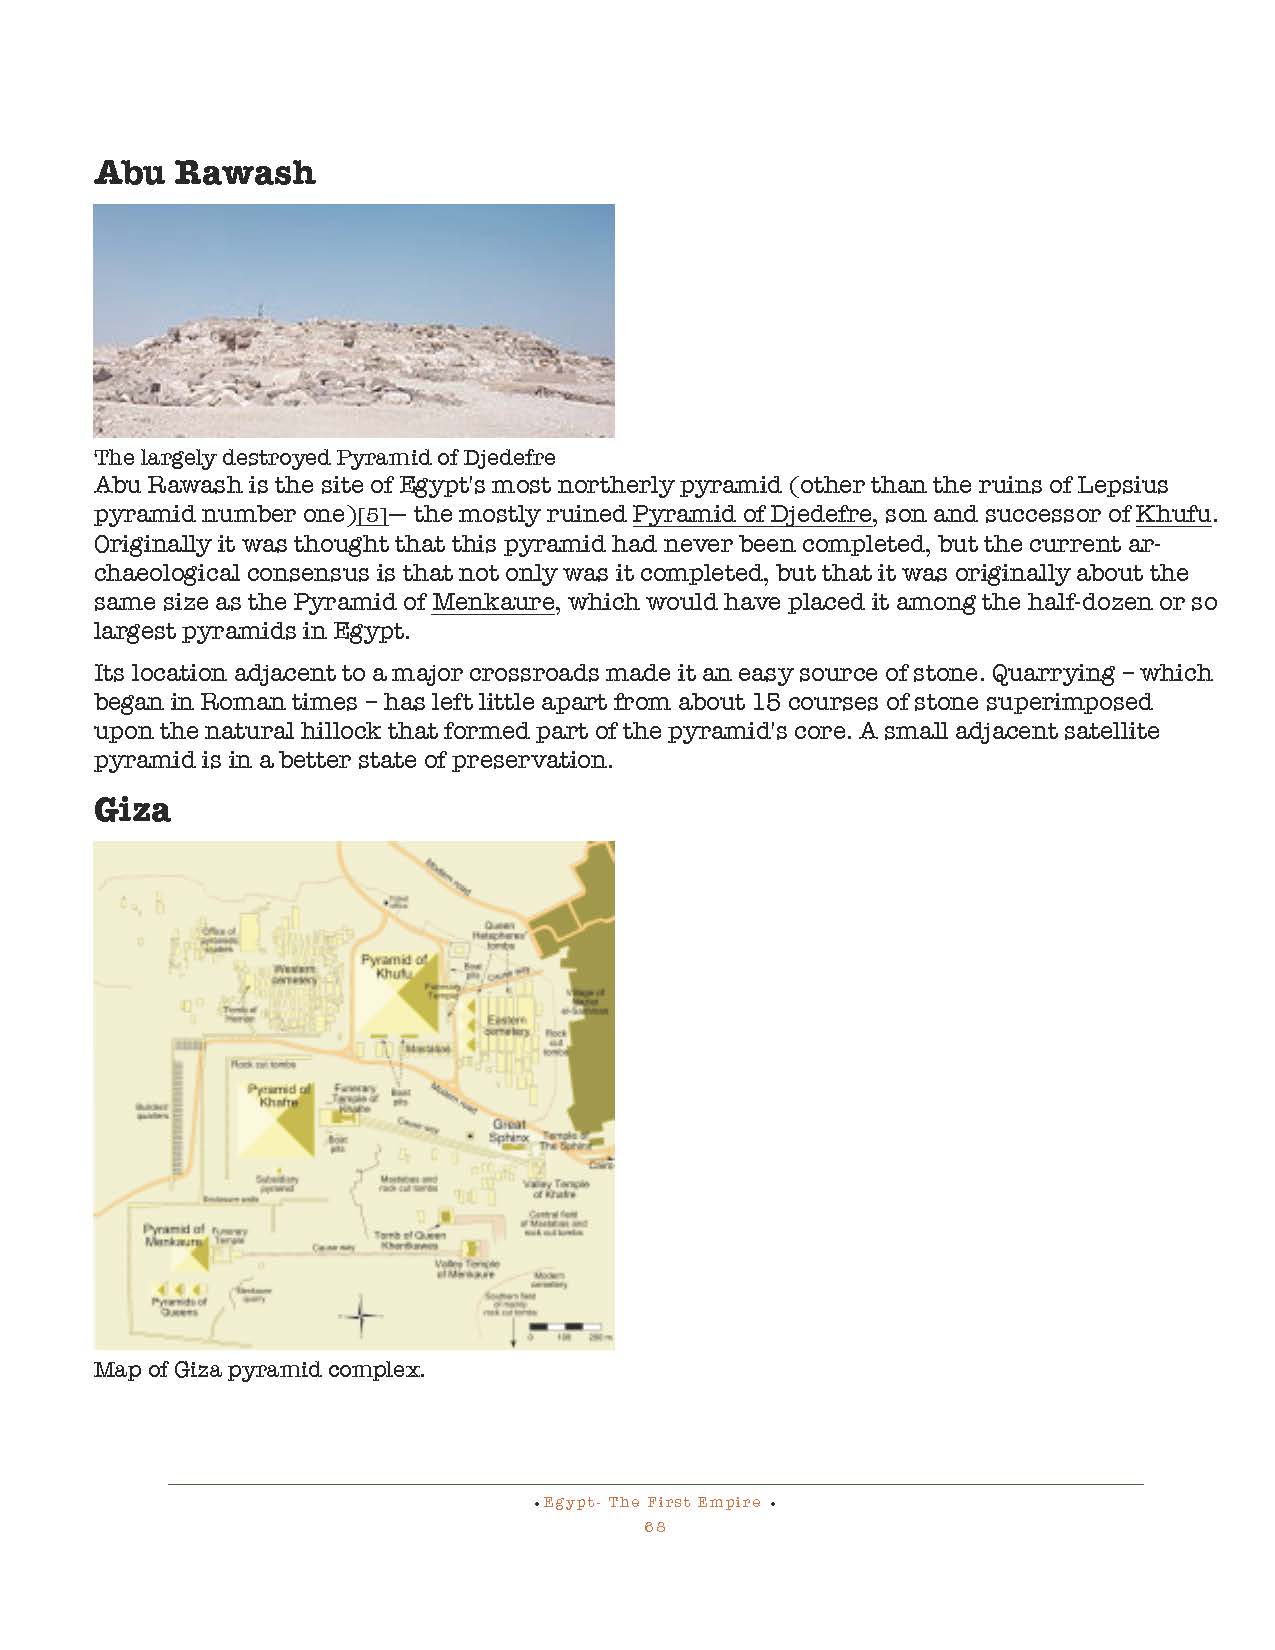 HOCE- Egypt  (First Empire) Notes_Page_068.jpg